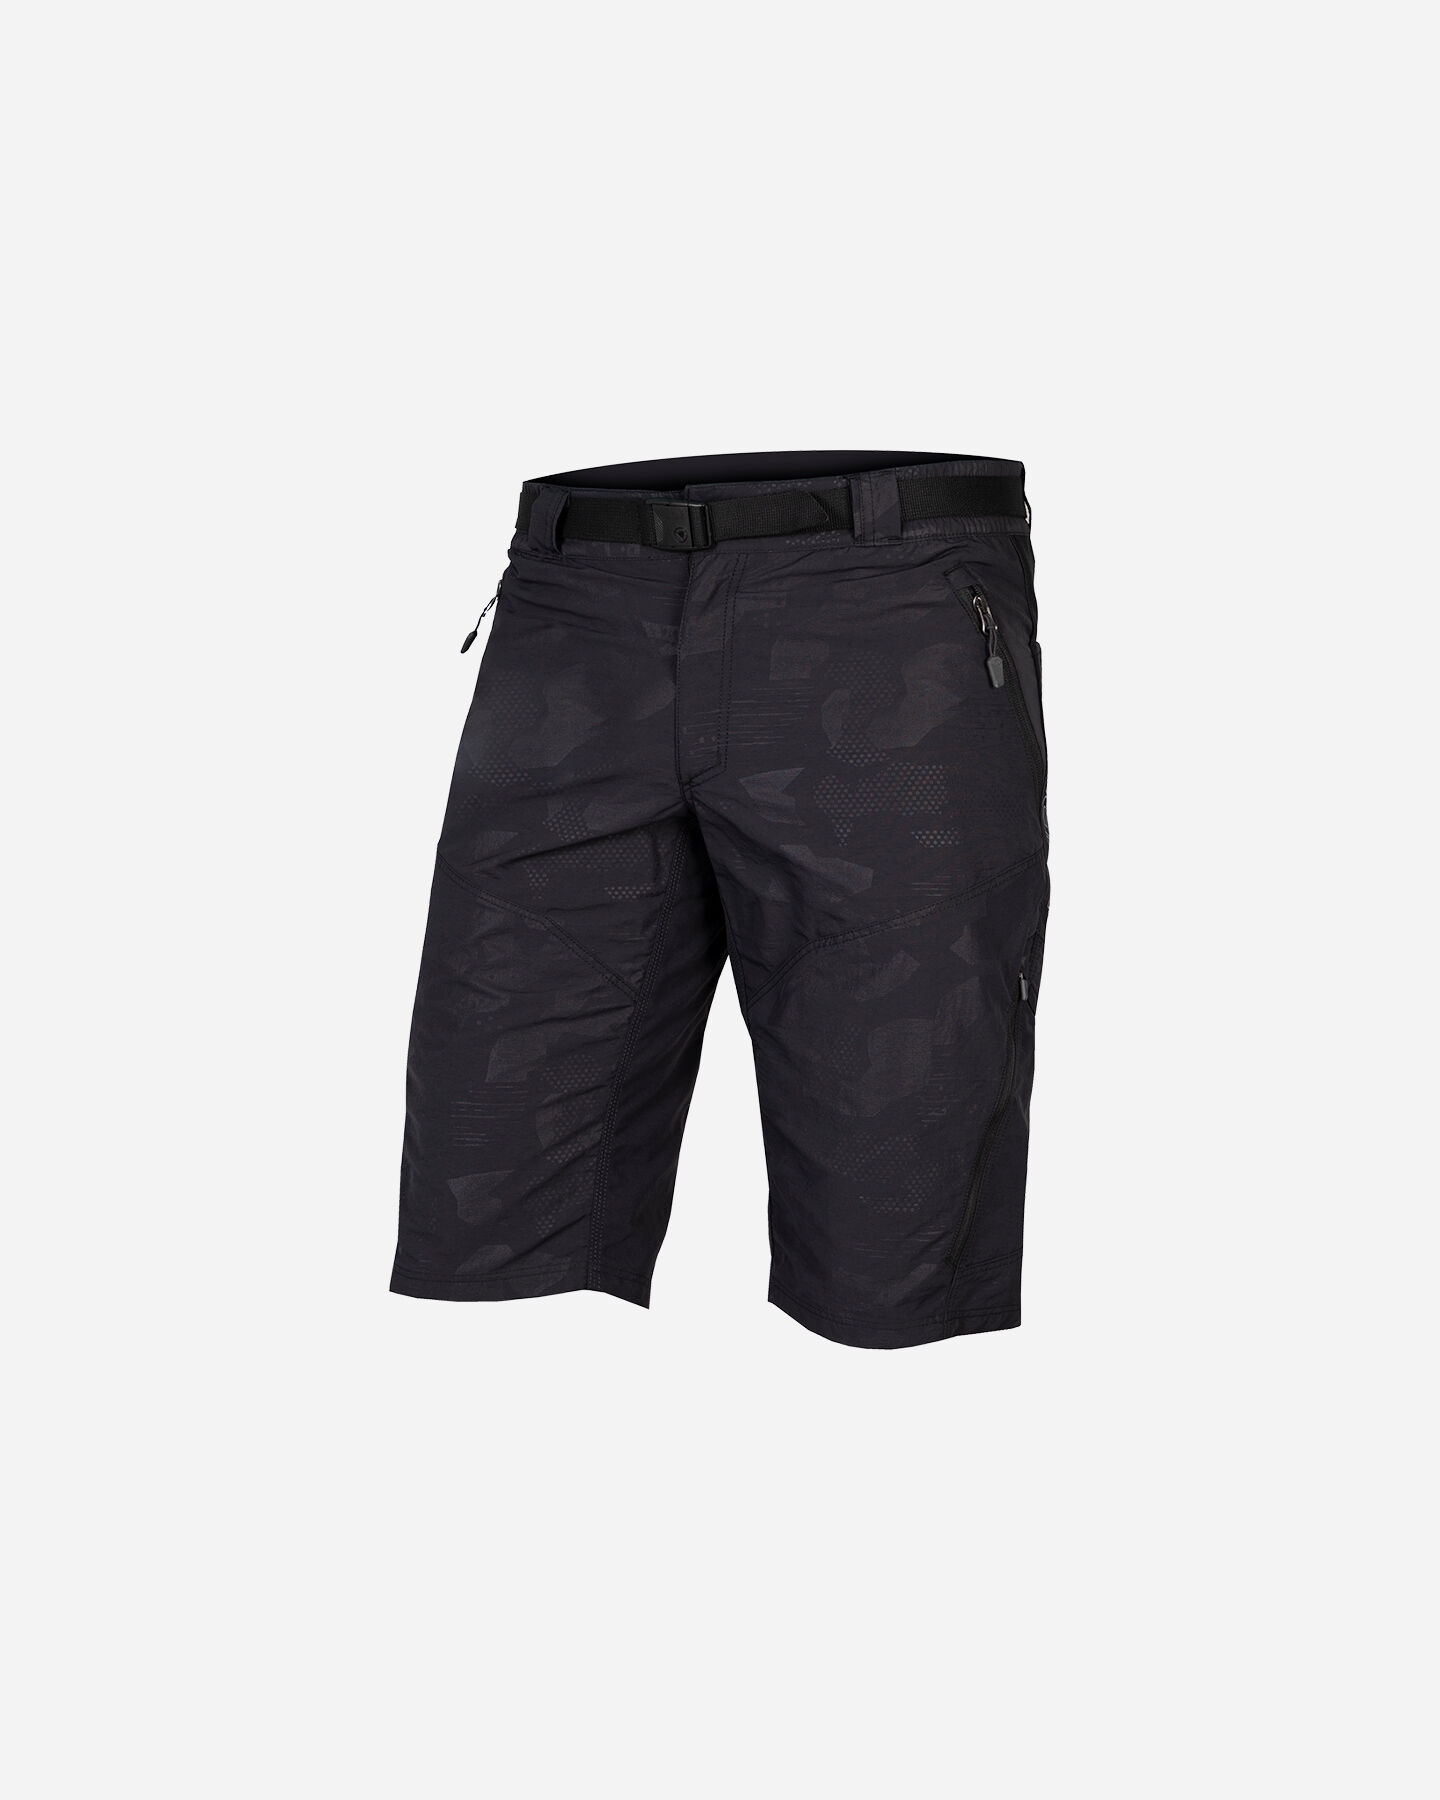  Short ciclismo ENDURA HUMMVEE WITH LINER M S4123647|1|S scatto 0